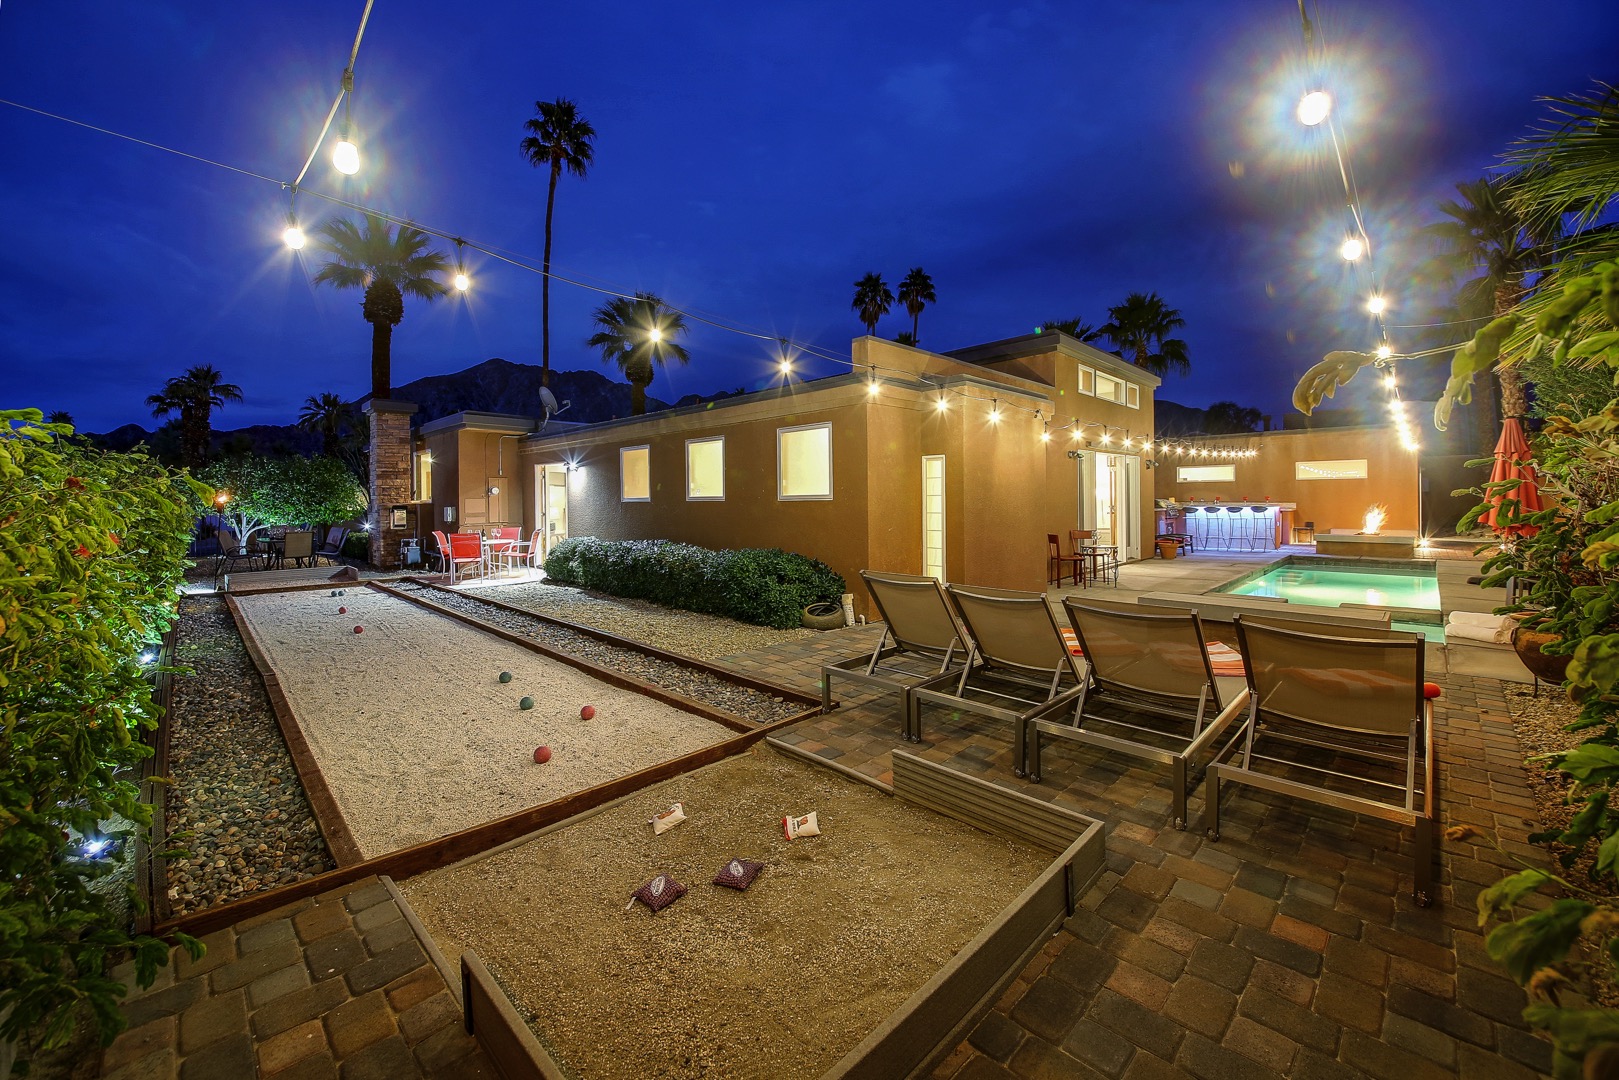 Bocce ball, anyone? Challenge a friend to a game of Bocce or horseshoe. Game on!